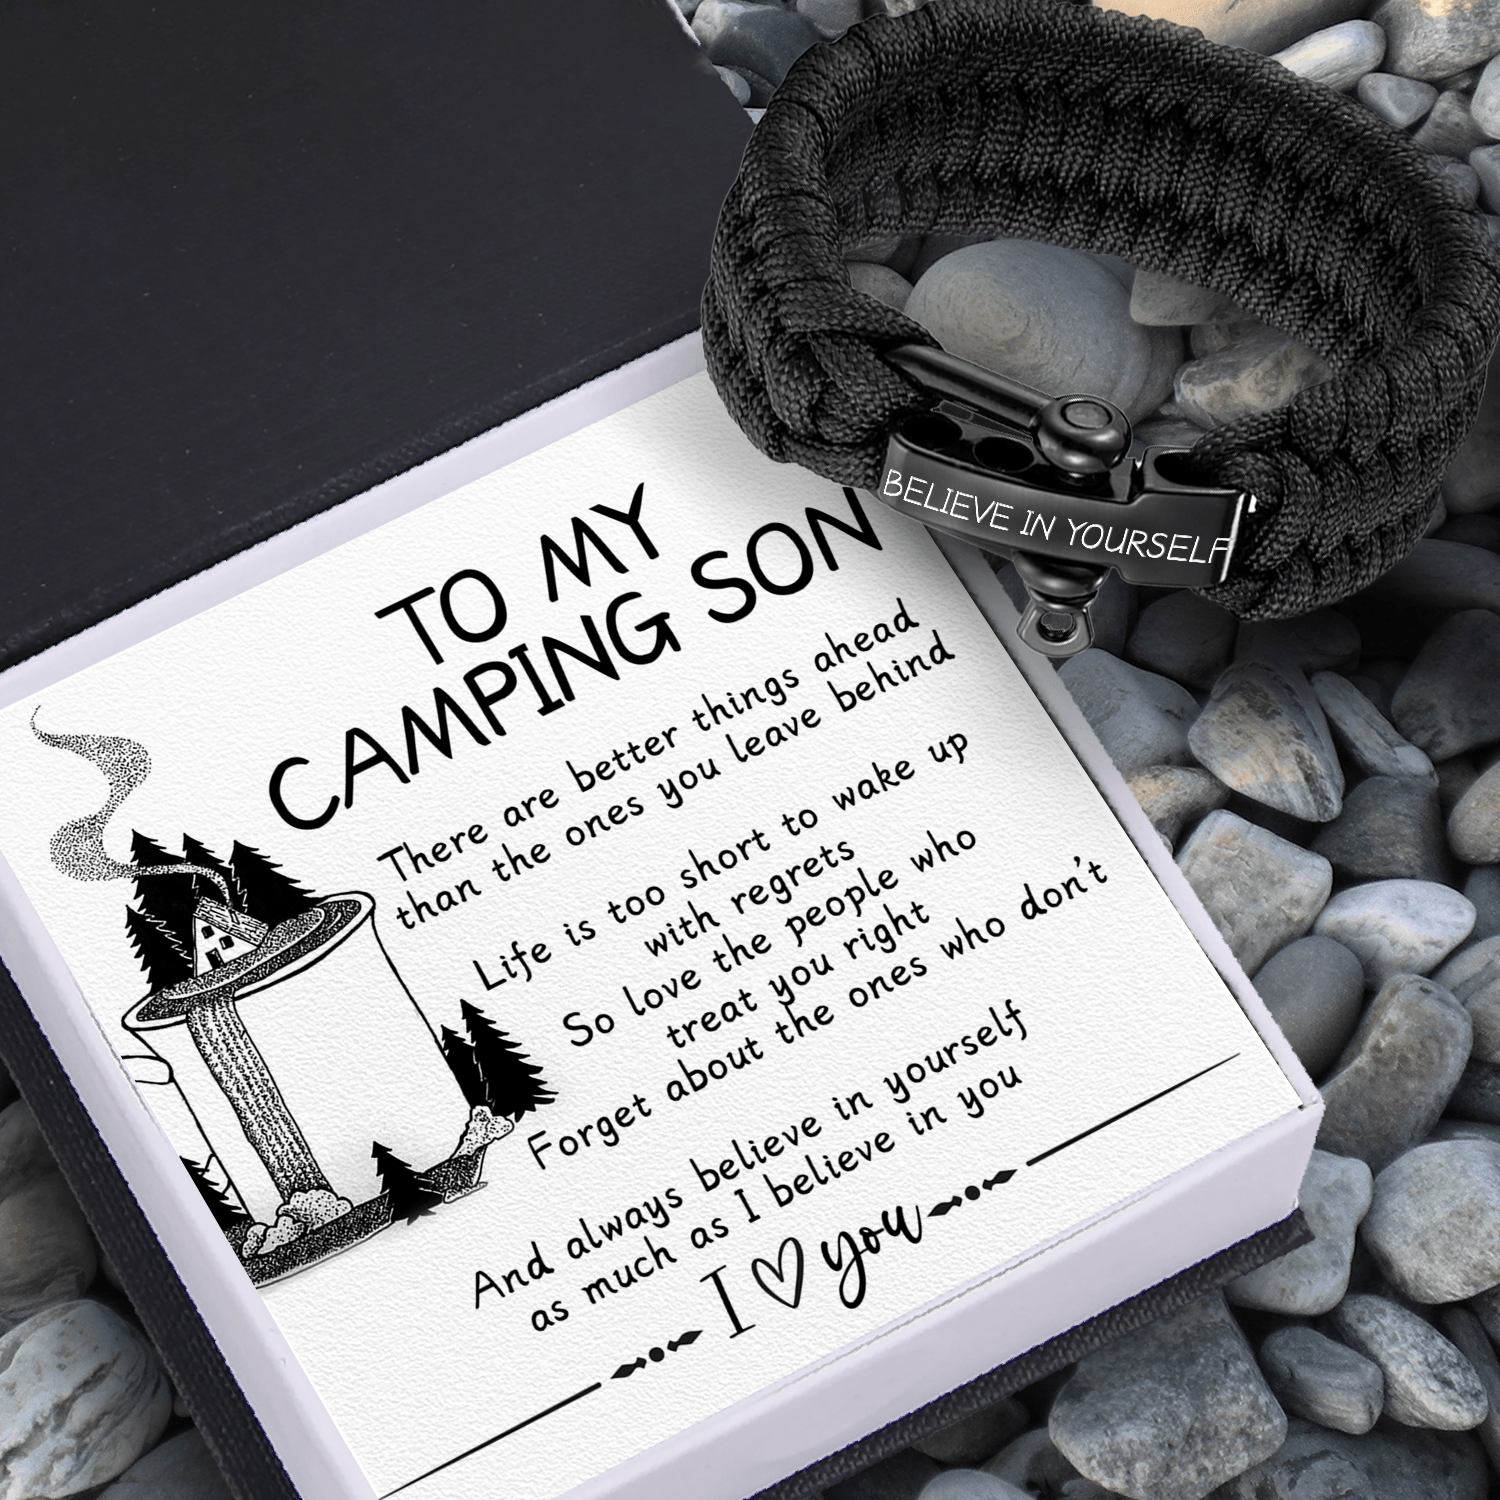 Paracord Rope Bracelet - Camping - To My Son - Always Believe In Yourself As Much As I Believe In You - Augbxa16005 - Gifts Holder